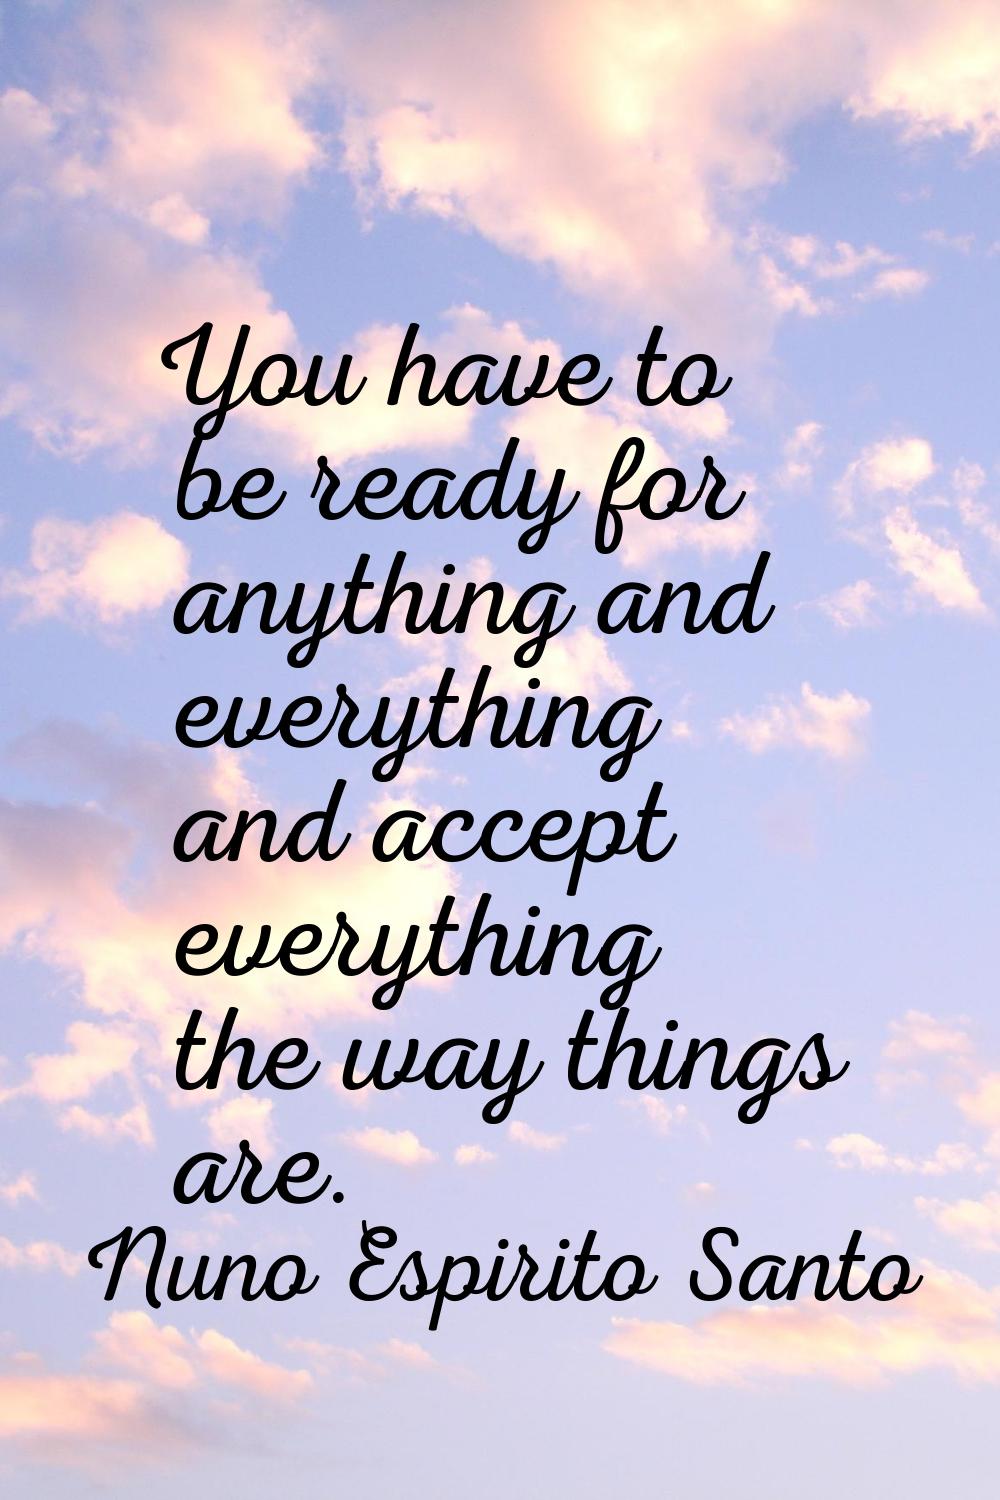 You have to be ready for anything and everything and accept everything the way things are.